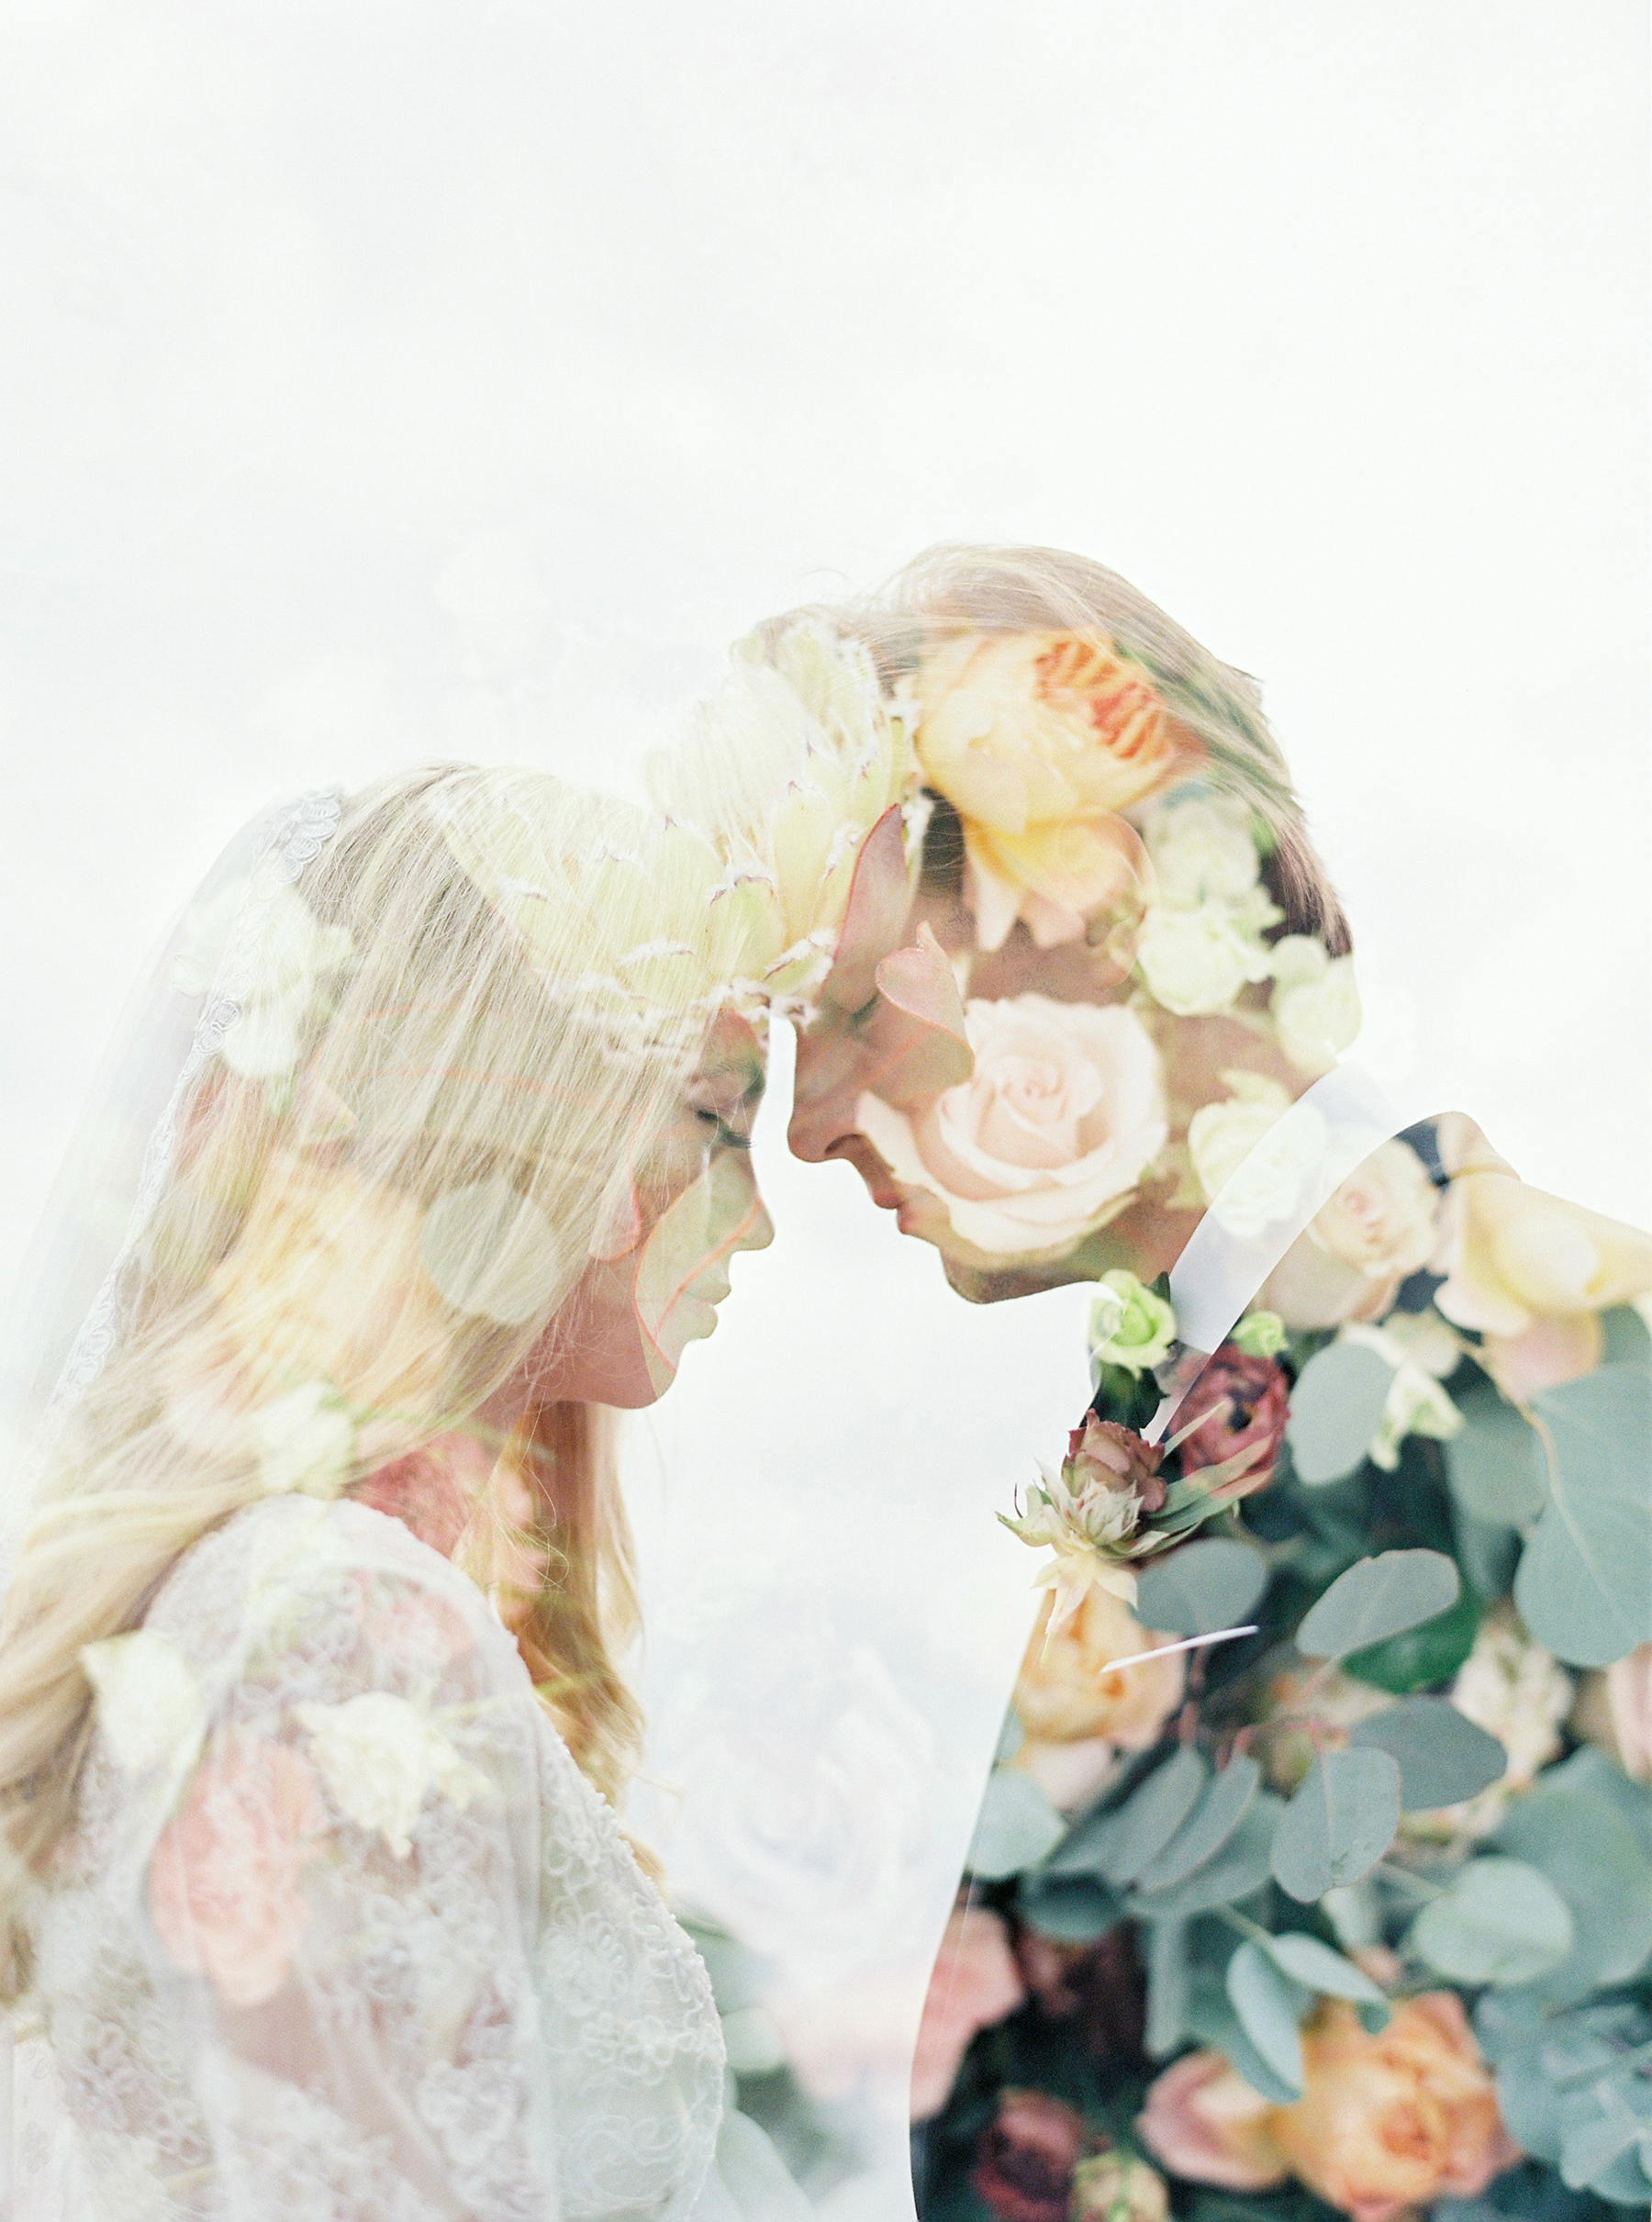 Bright and Warm Colored Wedding Inspiration in Sweden 2 Brides Photography48